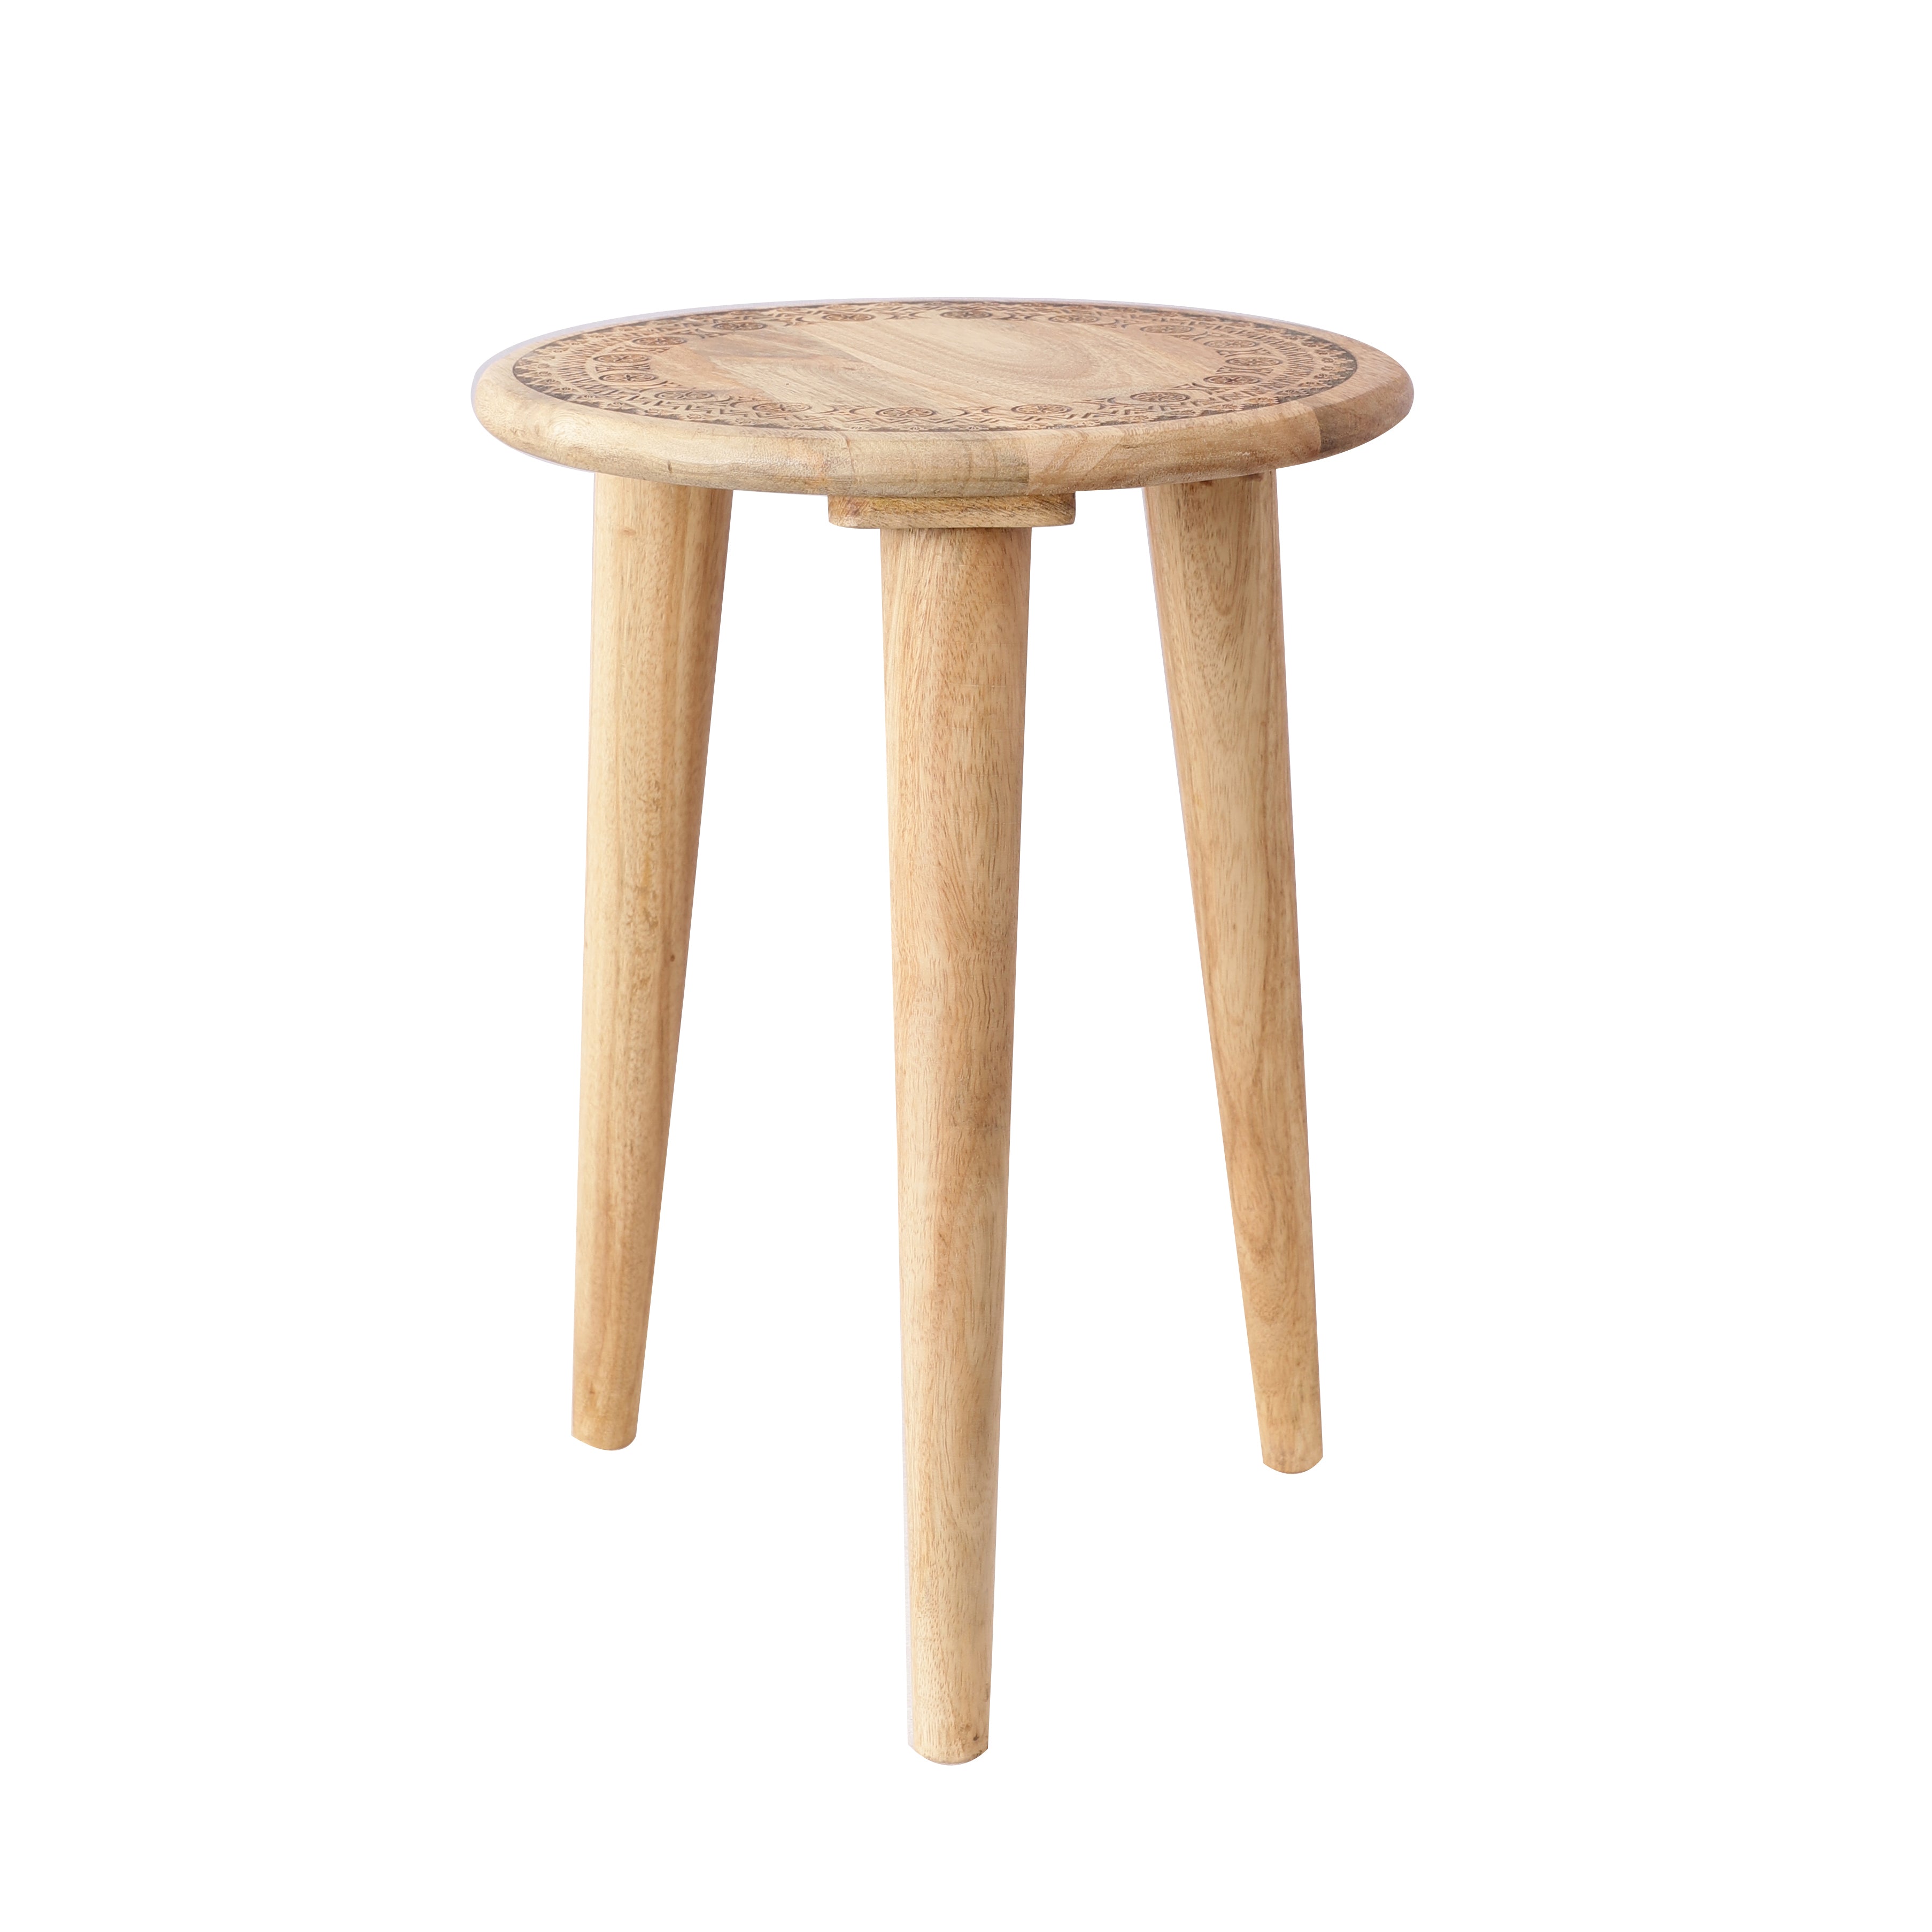 Round Wooden Table/Stool